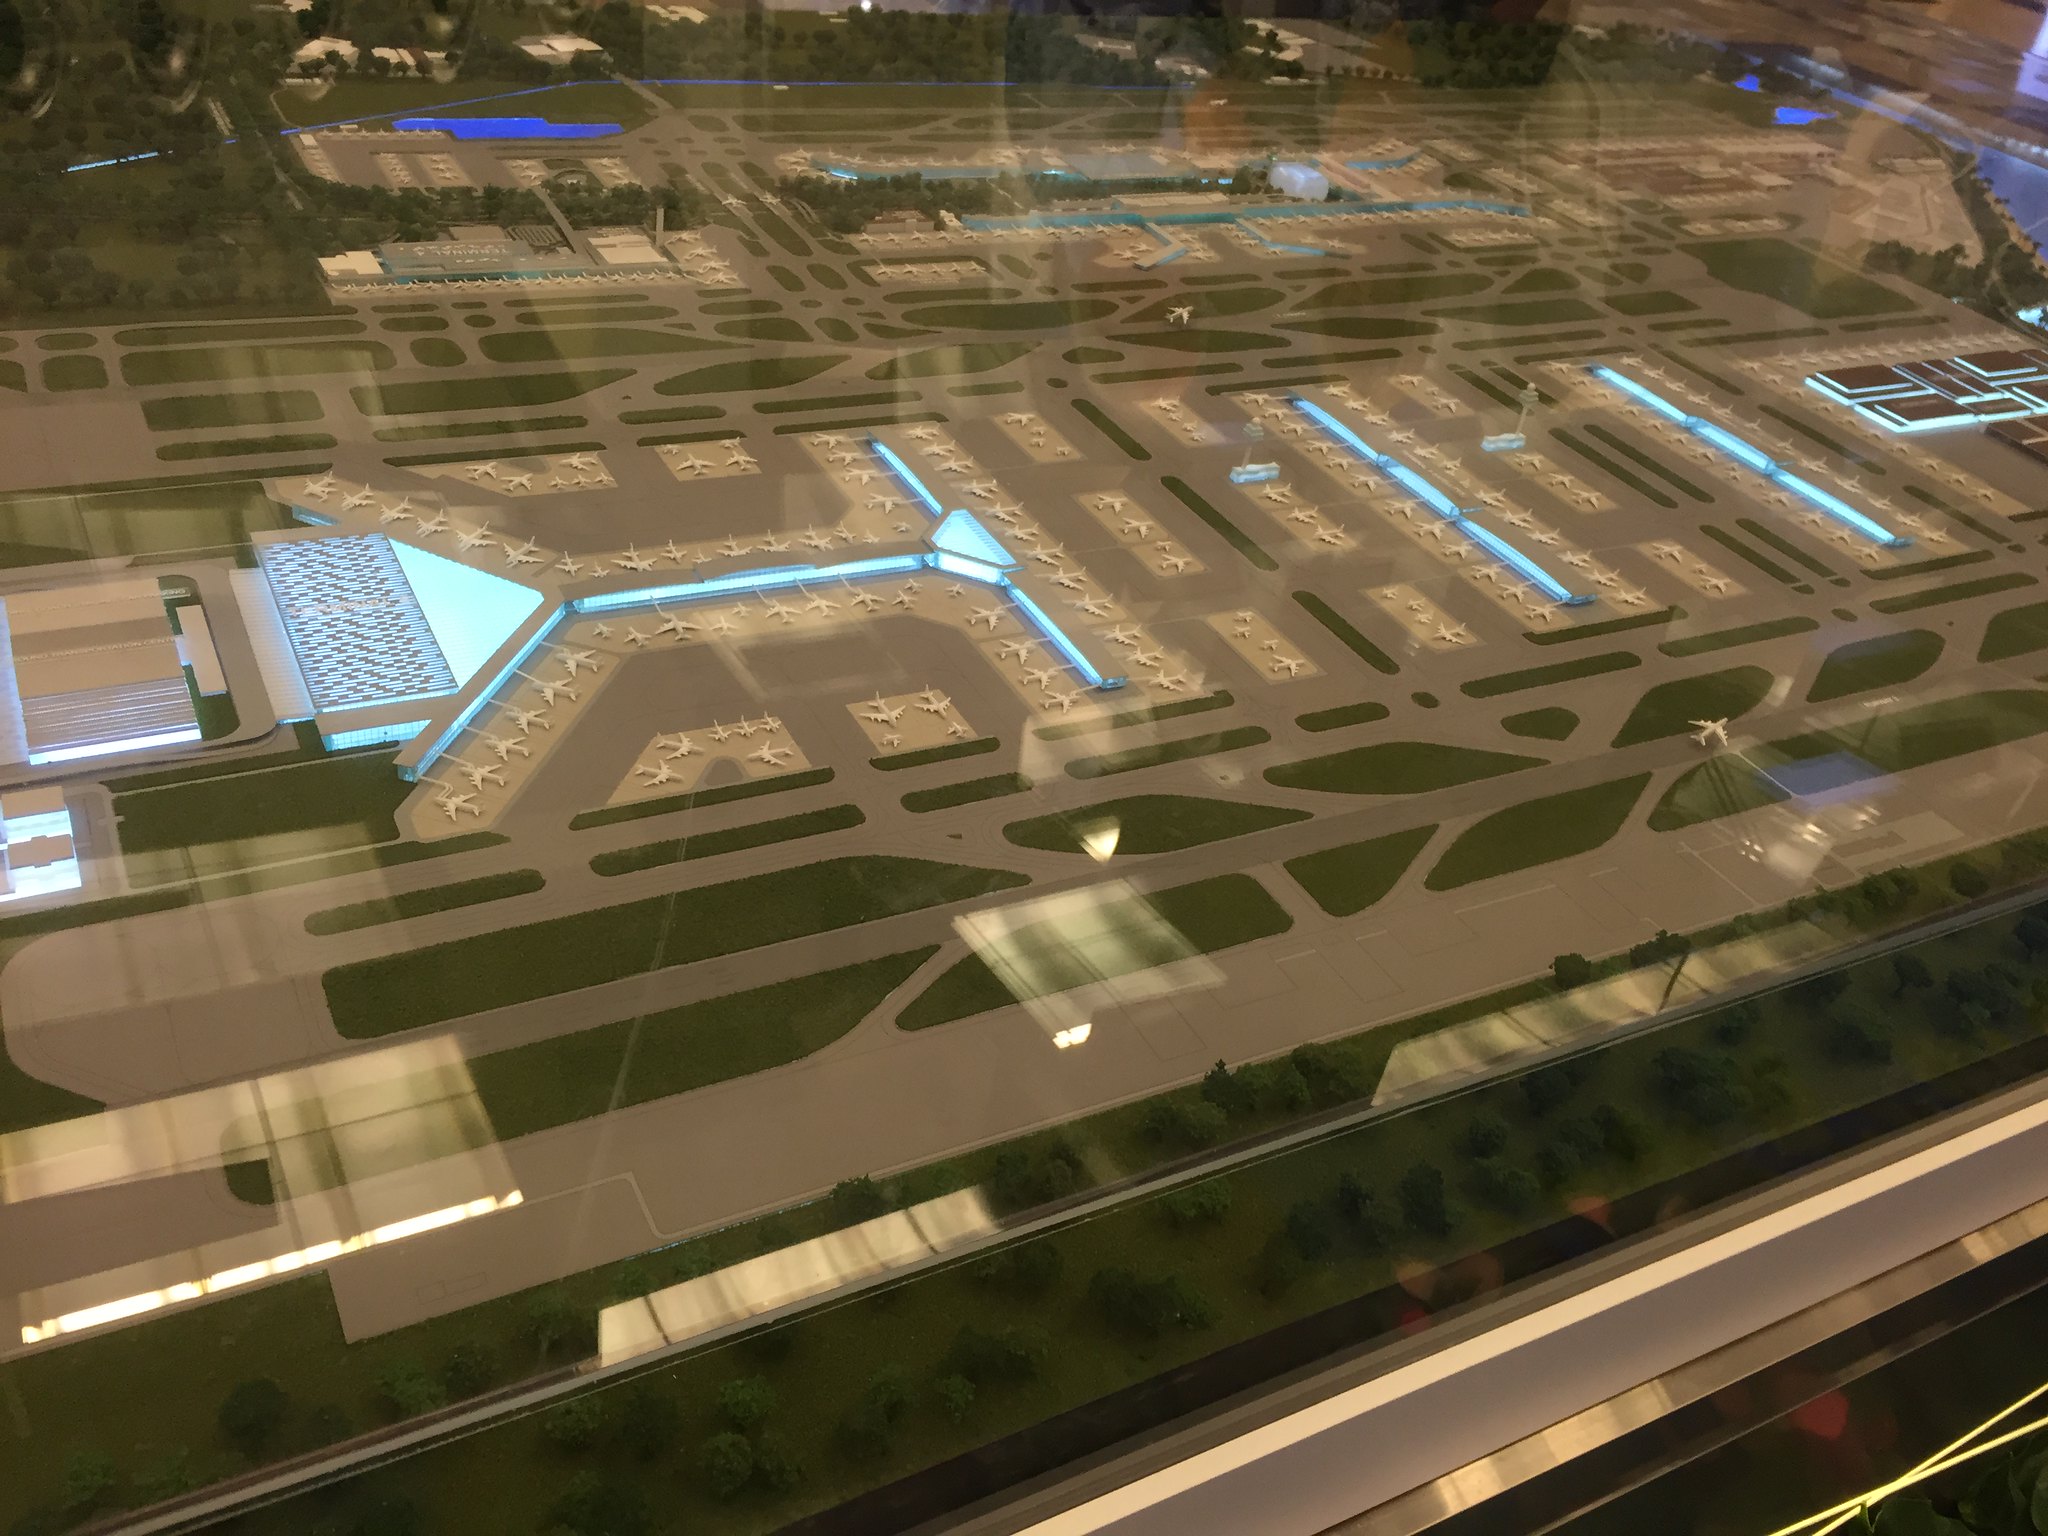 Changi Airport Terminal 5 Masterplan by CX734, on Flickr